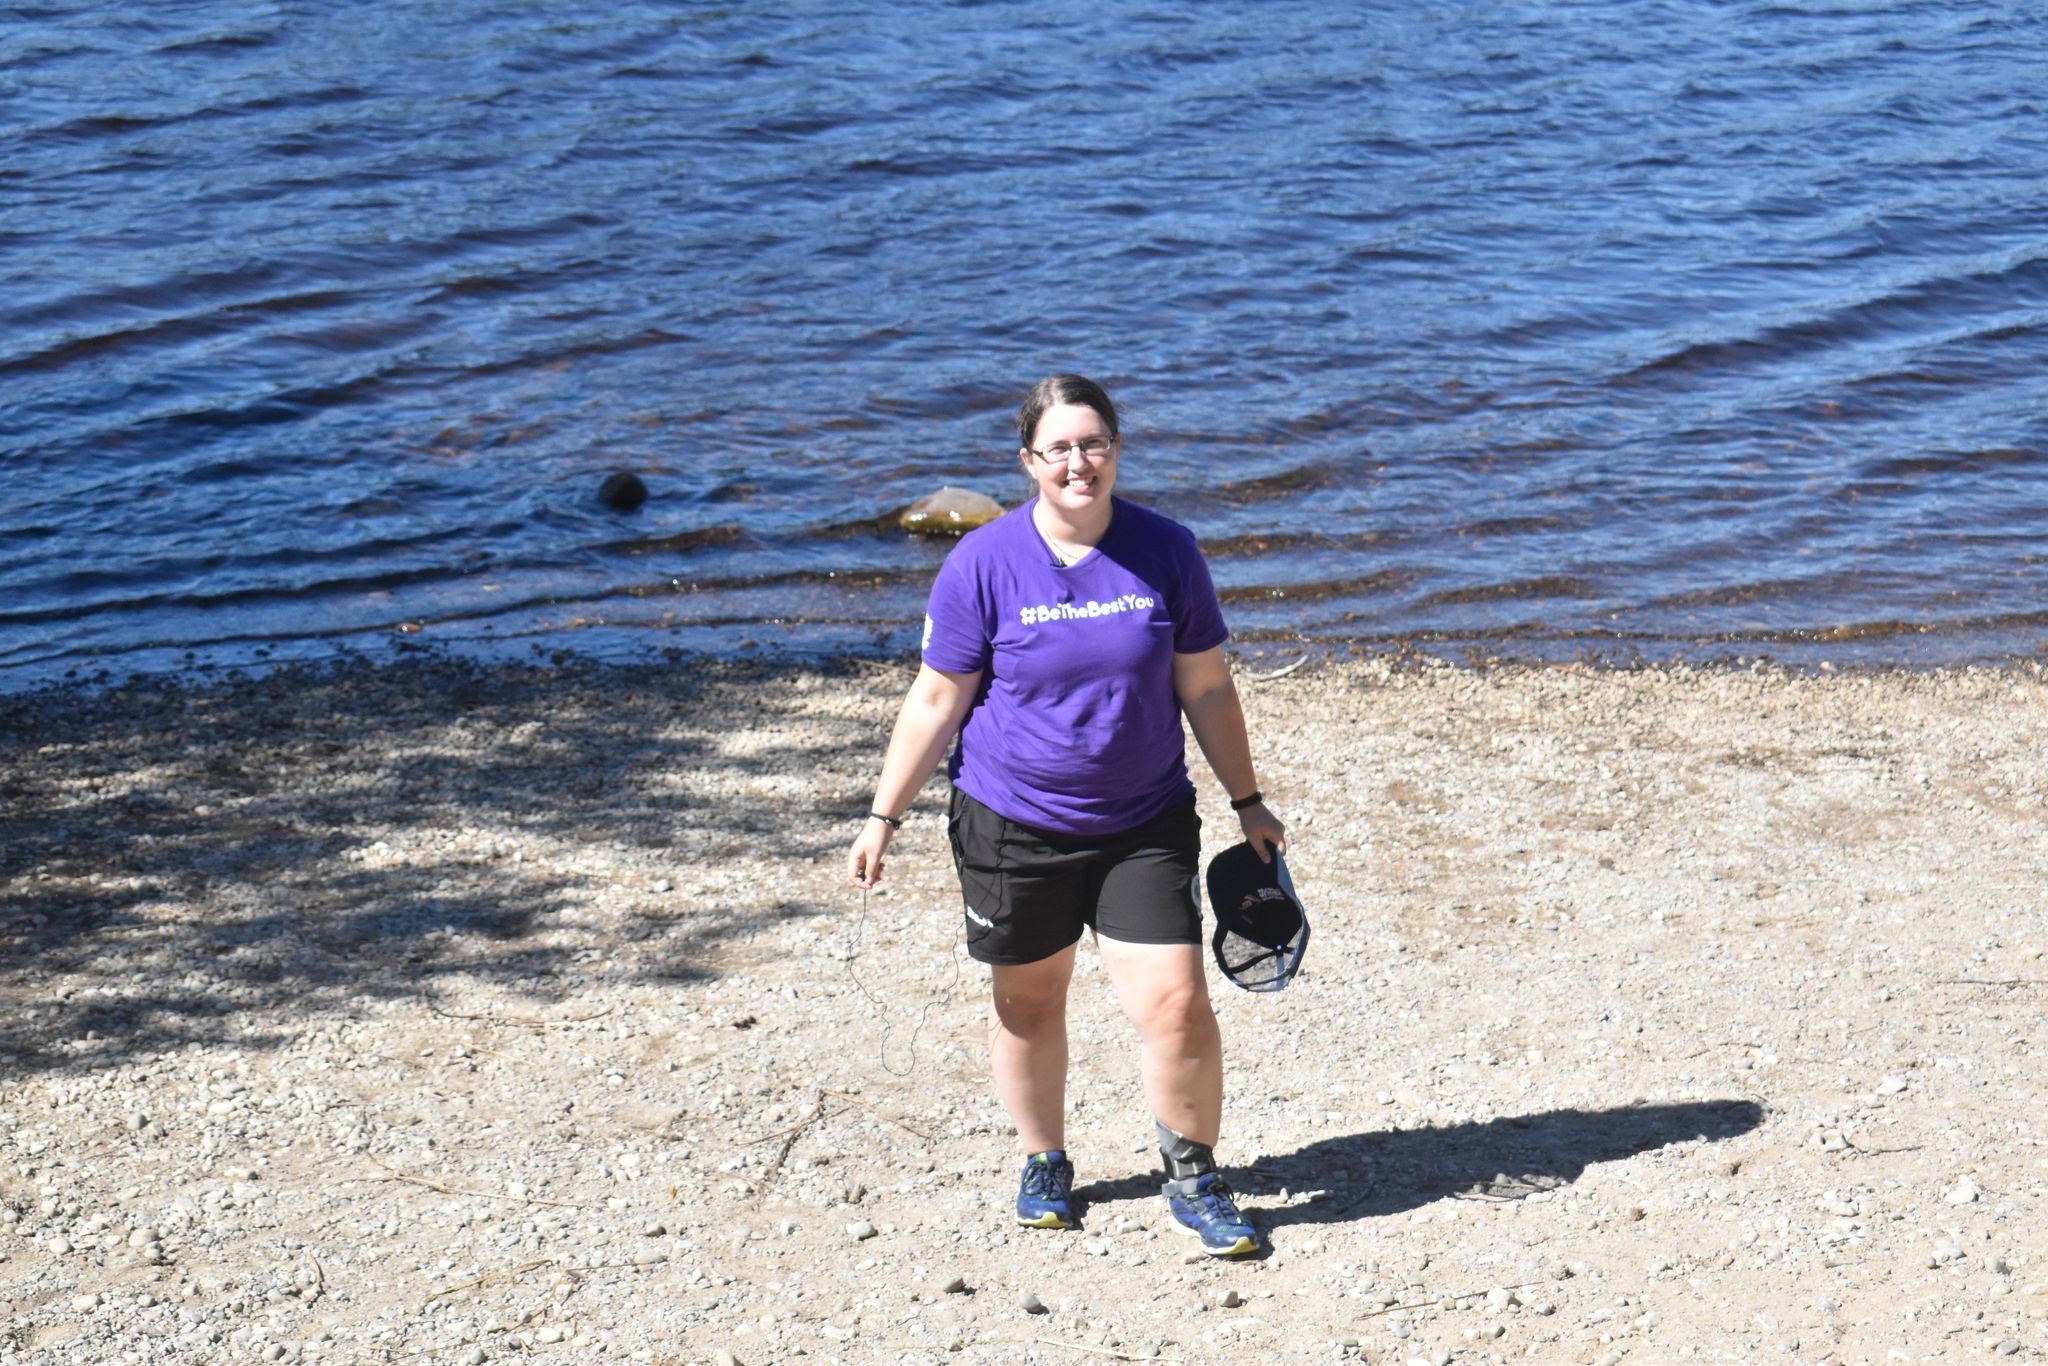 Anja, standing smiling in front of a body of water wearing a purple tshirt, black shorts, and holding a baseball cap